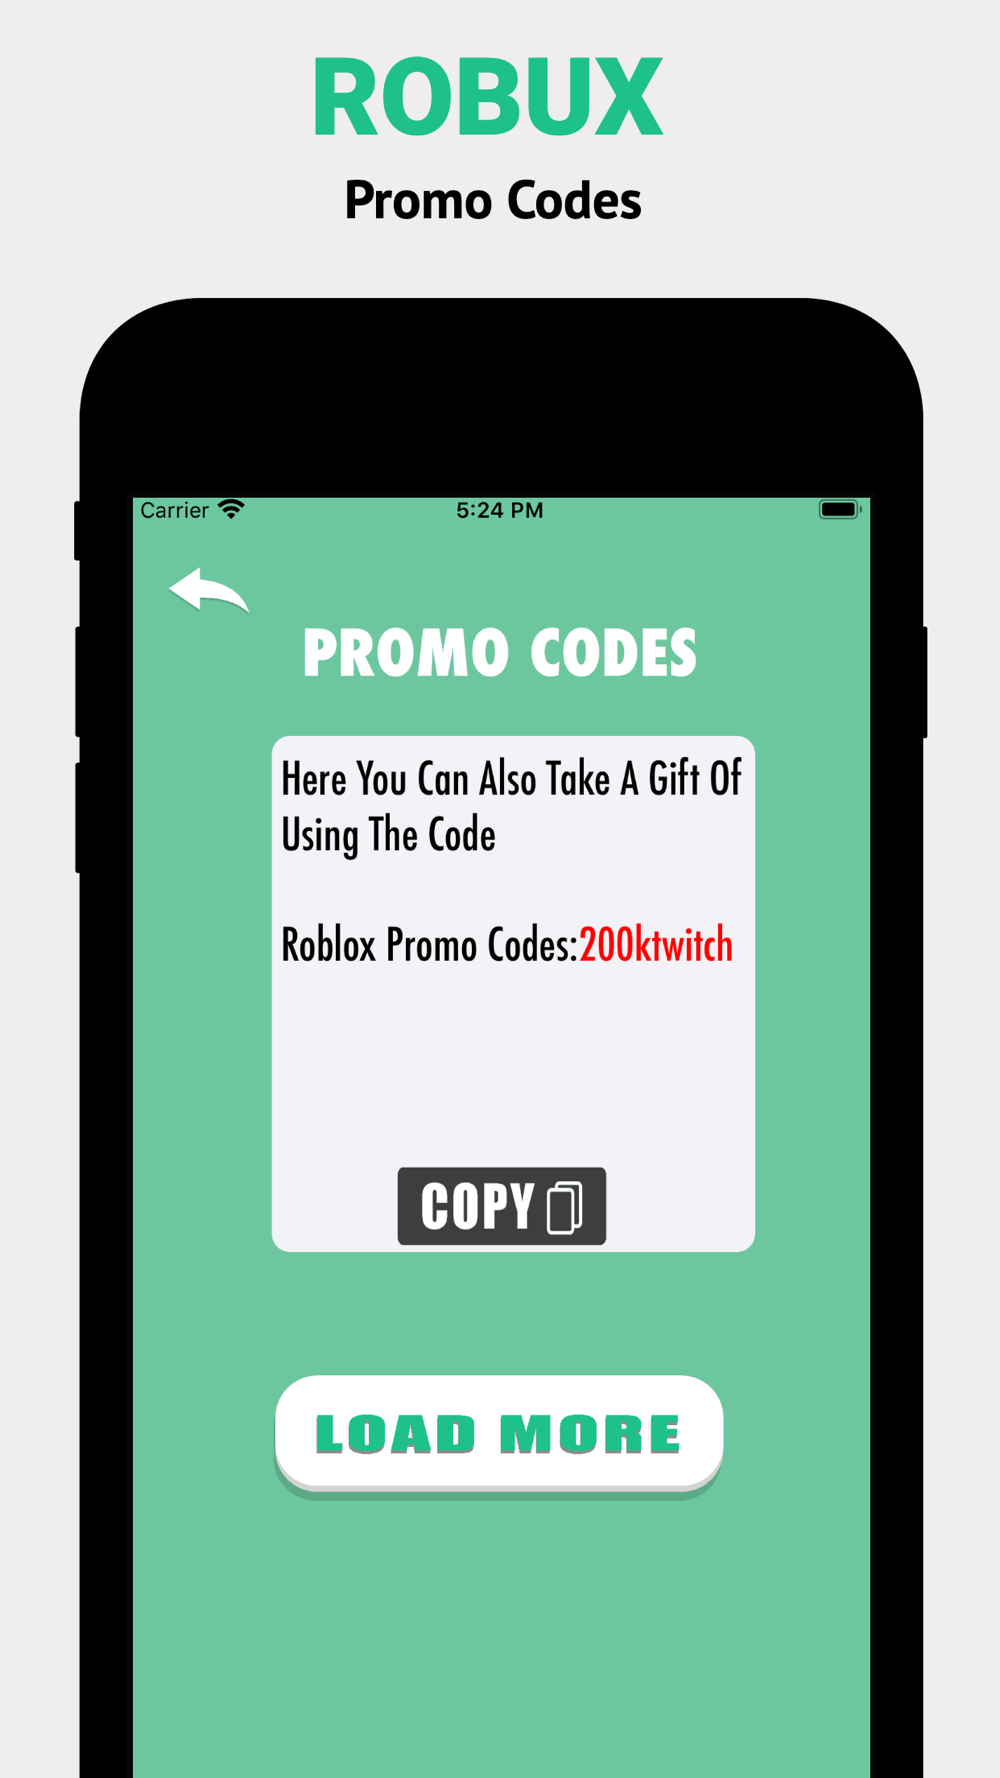 Robux Promo Codes For Roblox Free Download App For Iphone Steprimo Com - roblox promo codes mobile